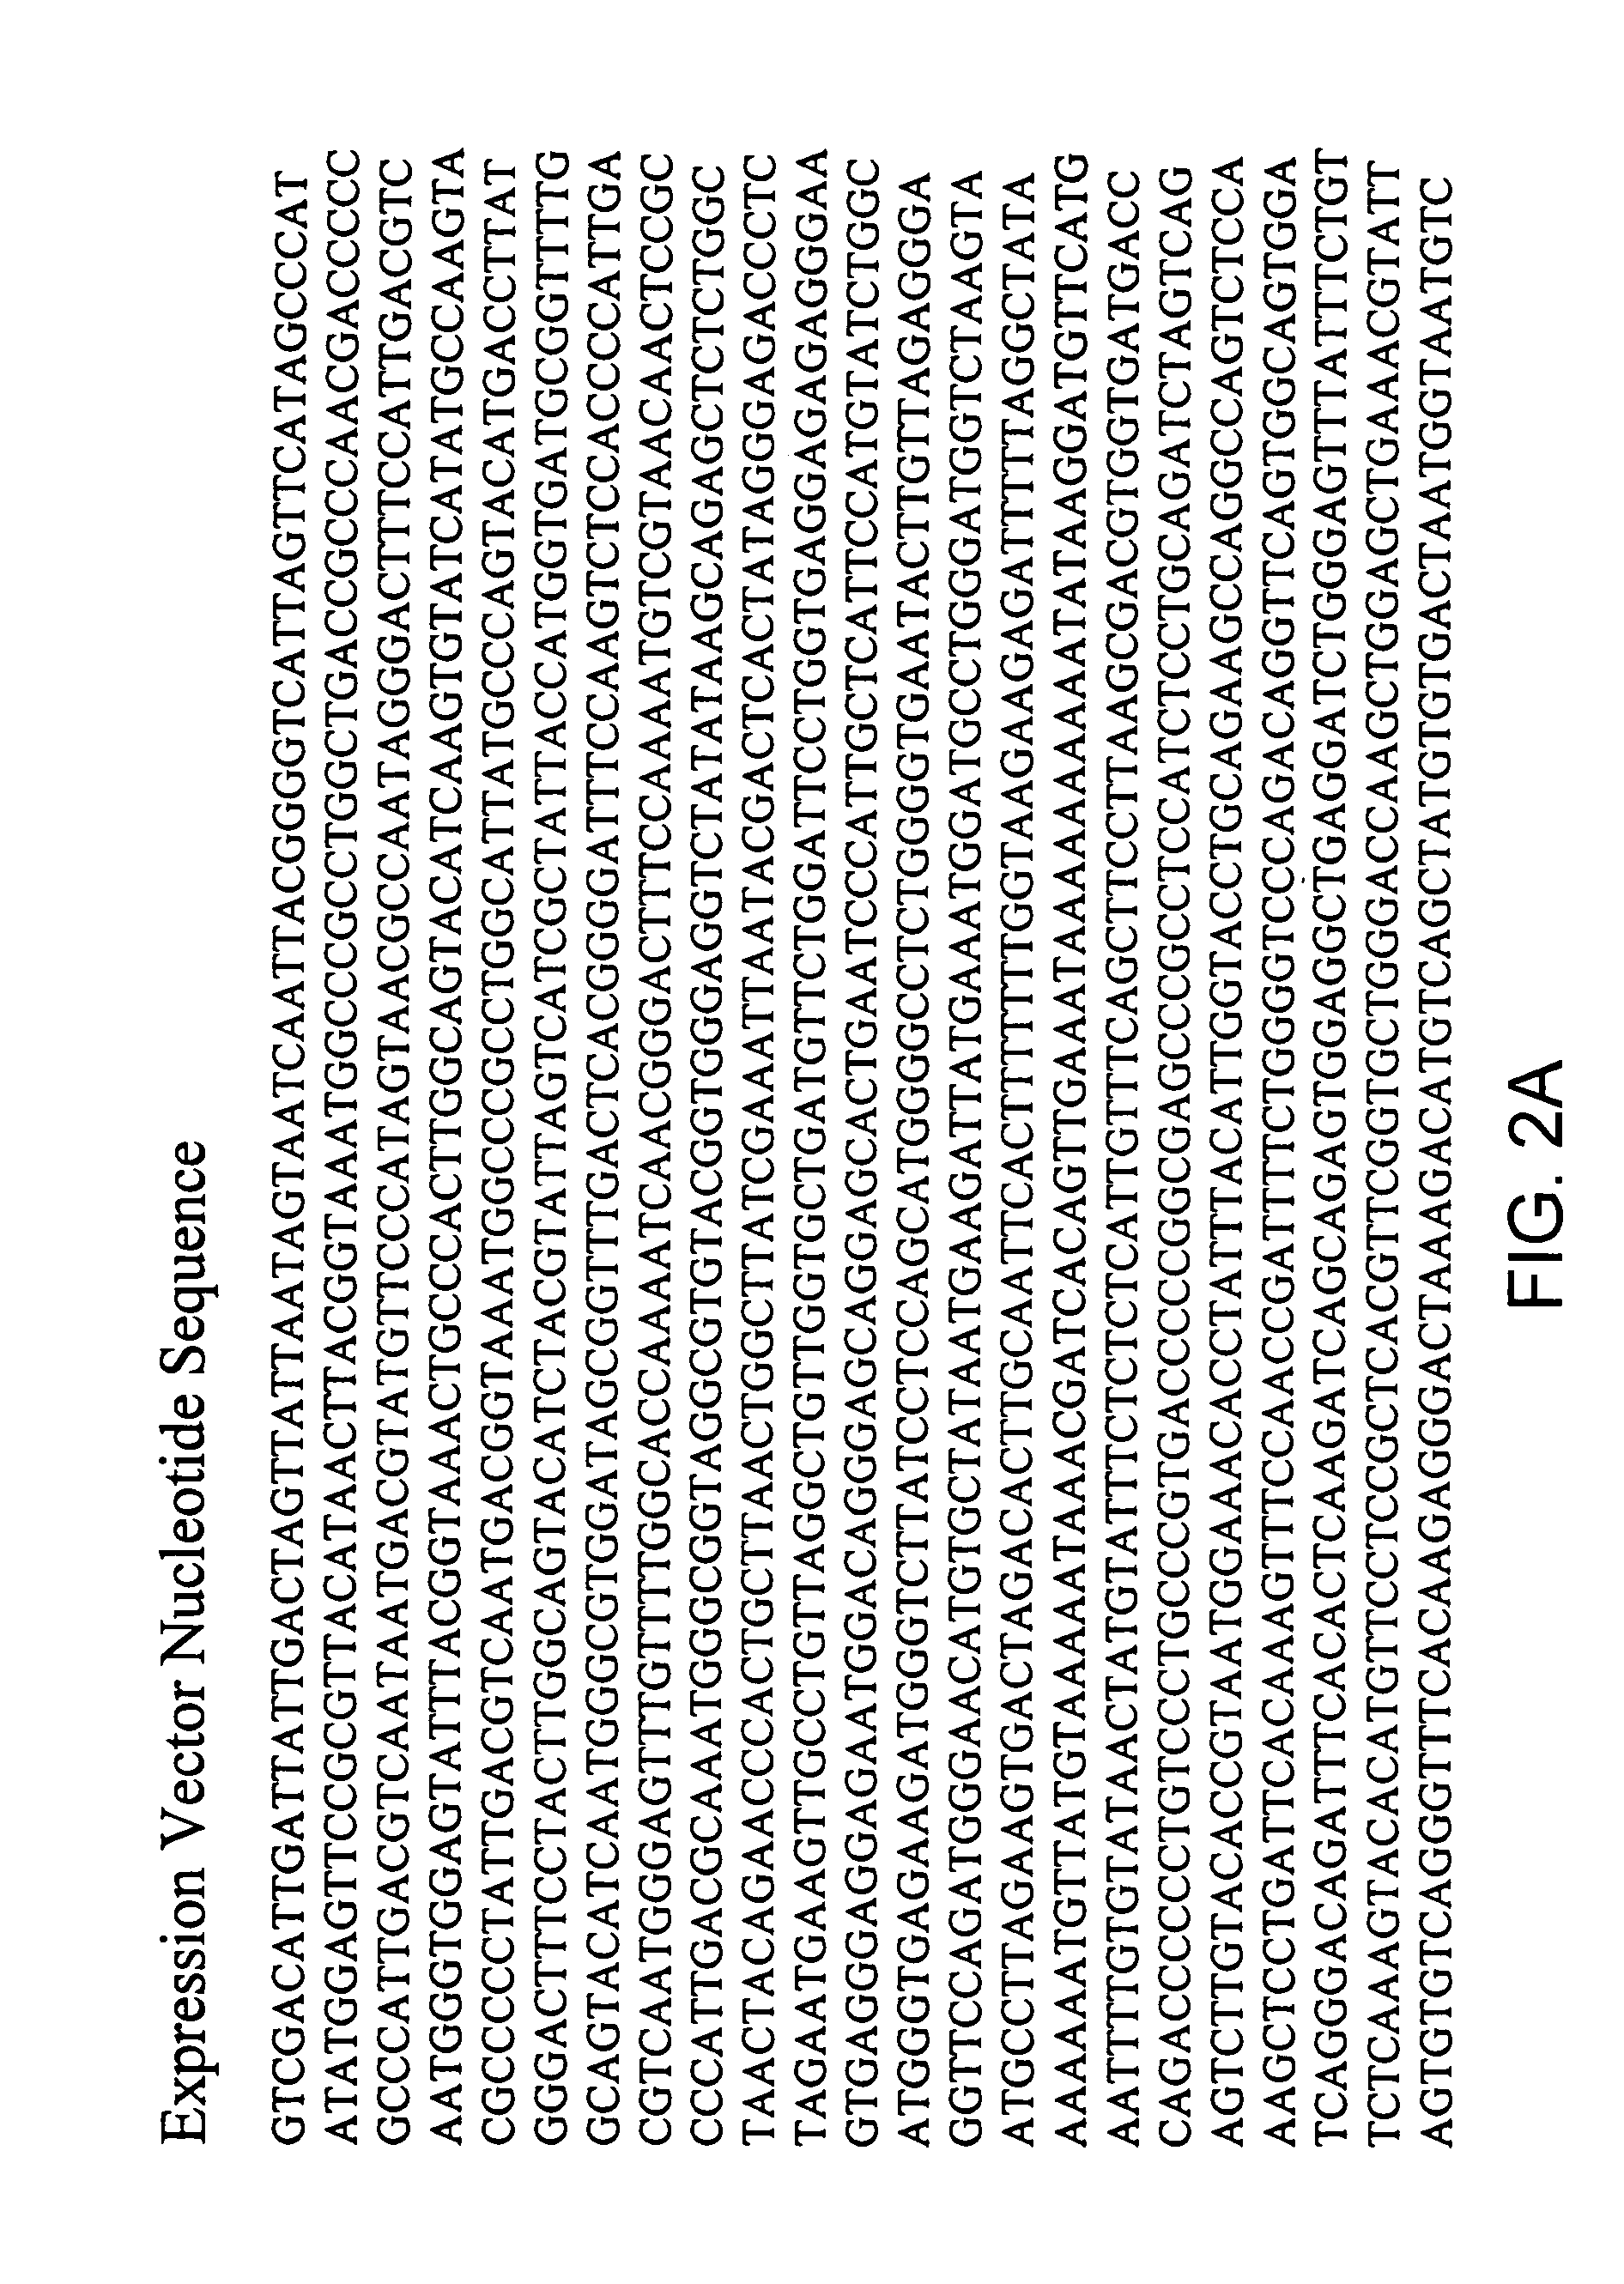 Immunocytokine sequences and uses thereof